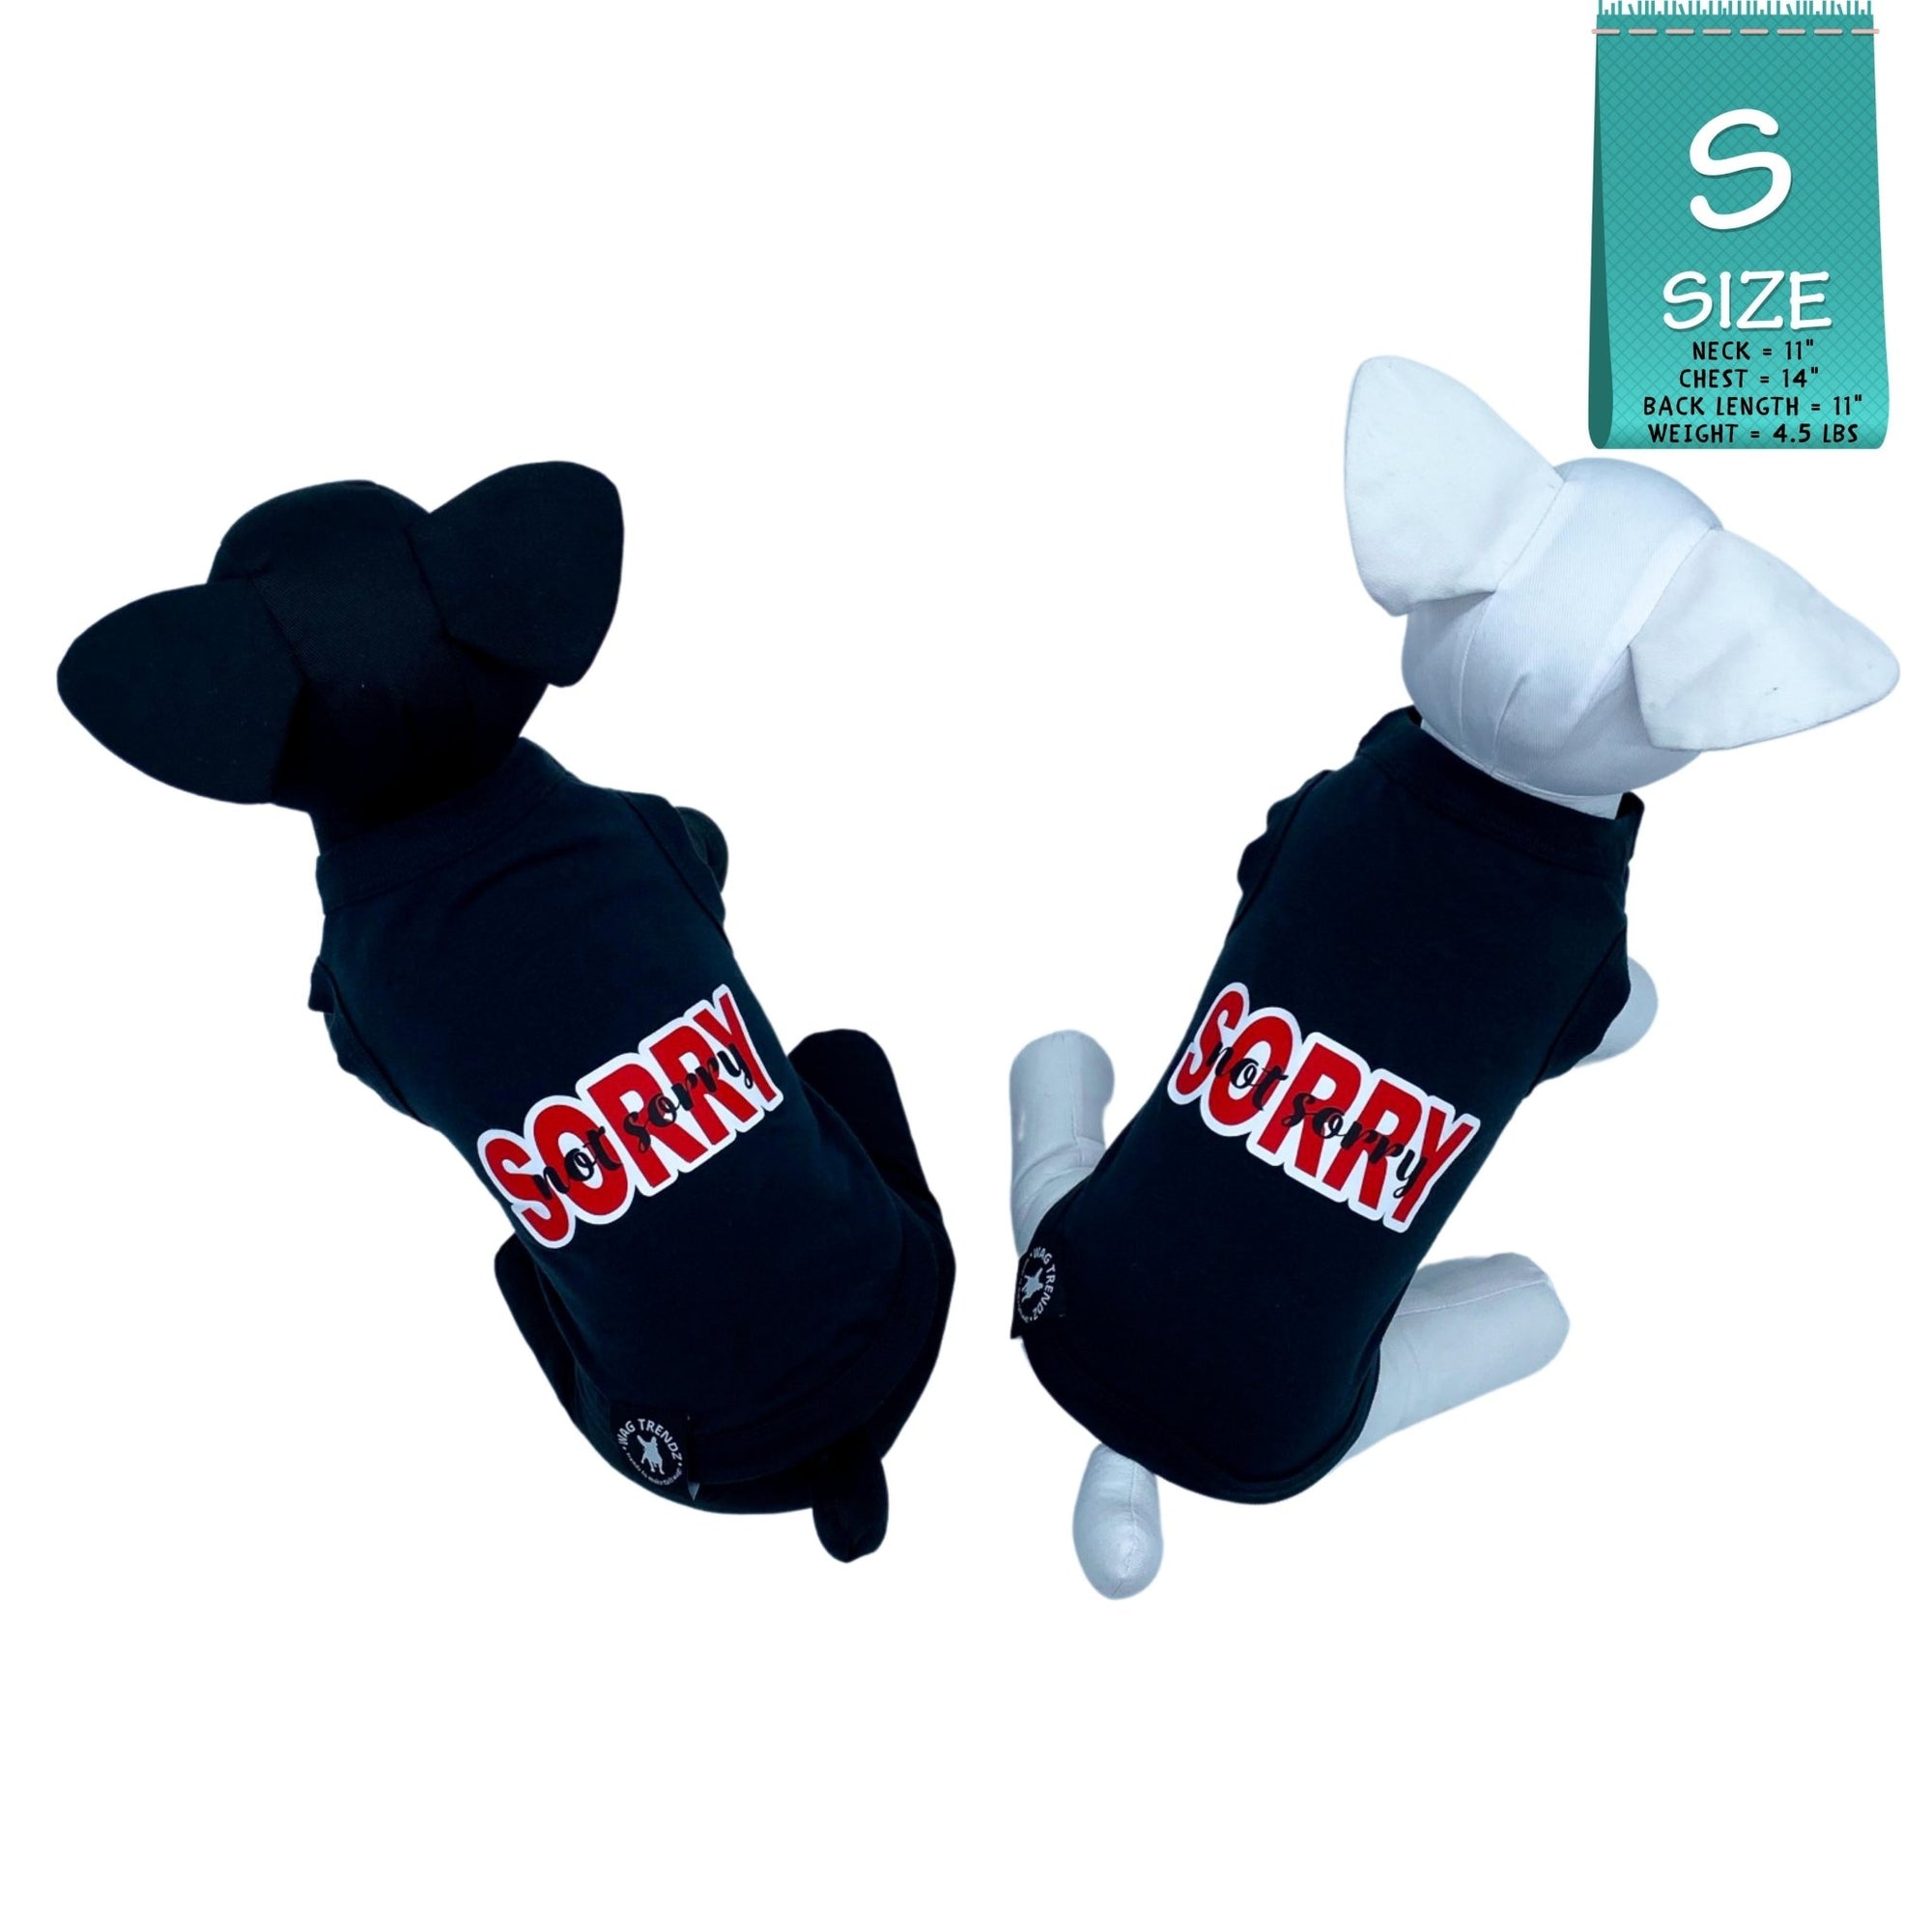 Dog T-Shirt - stuffed dogs one black and one white wearing &quot;Sorry Not Sorry&quot; black dog t-shirt with red and white lettering on back - against solid white background - Wag Trendz